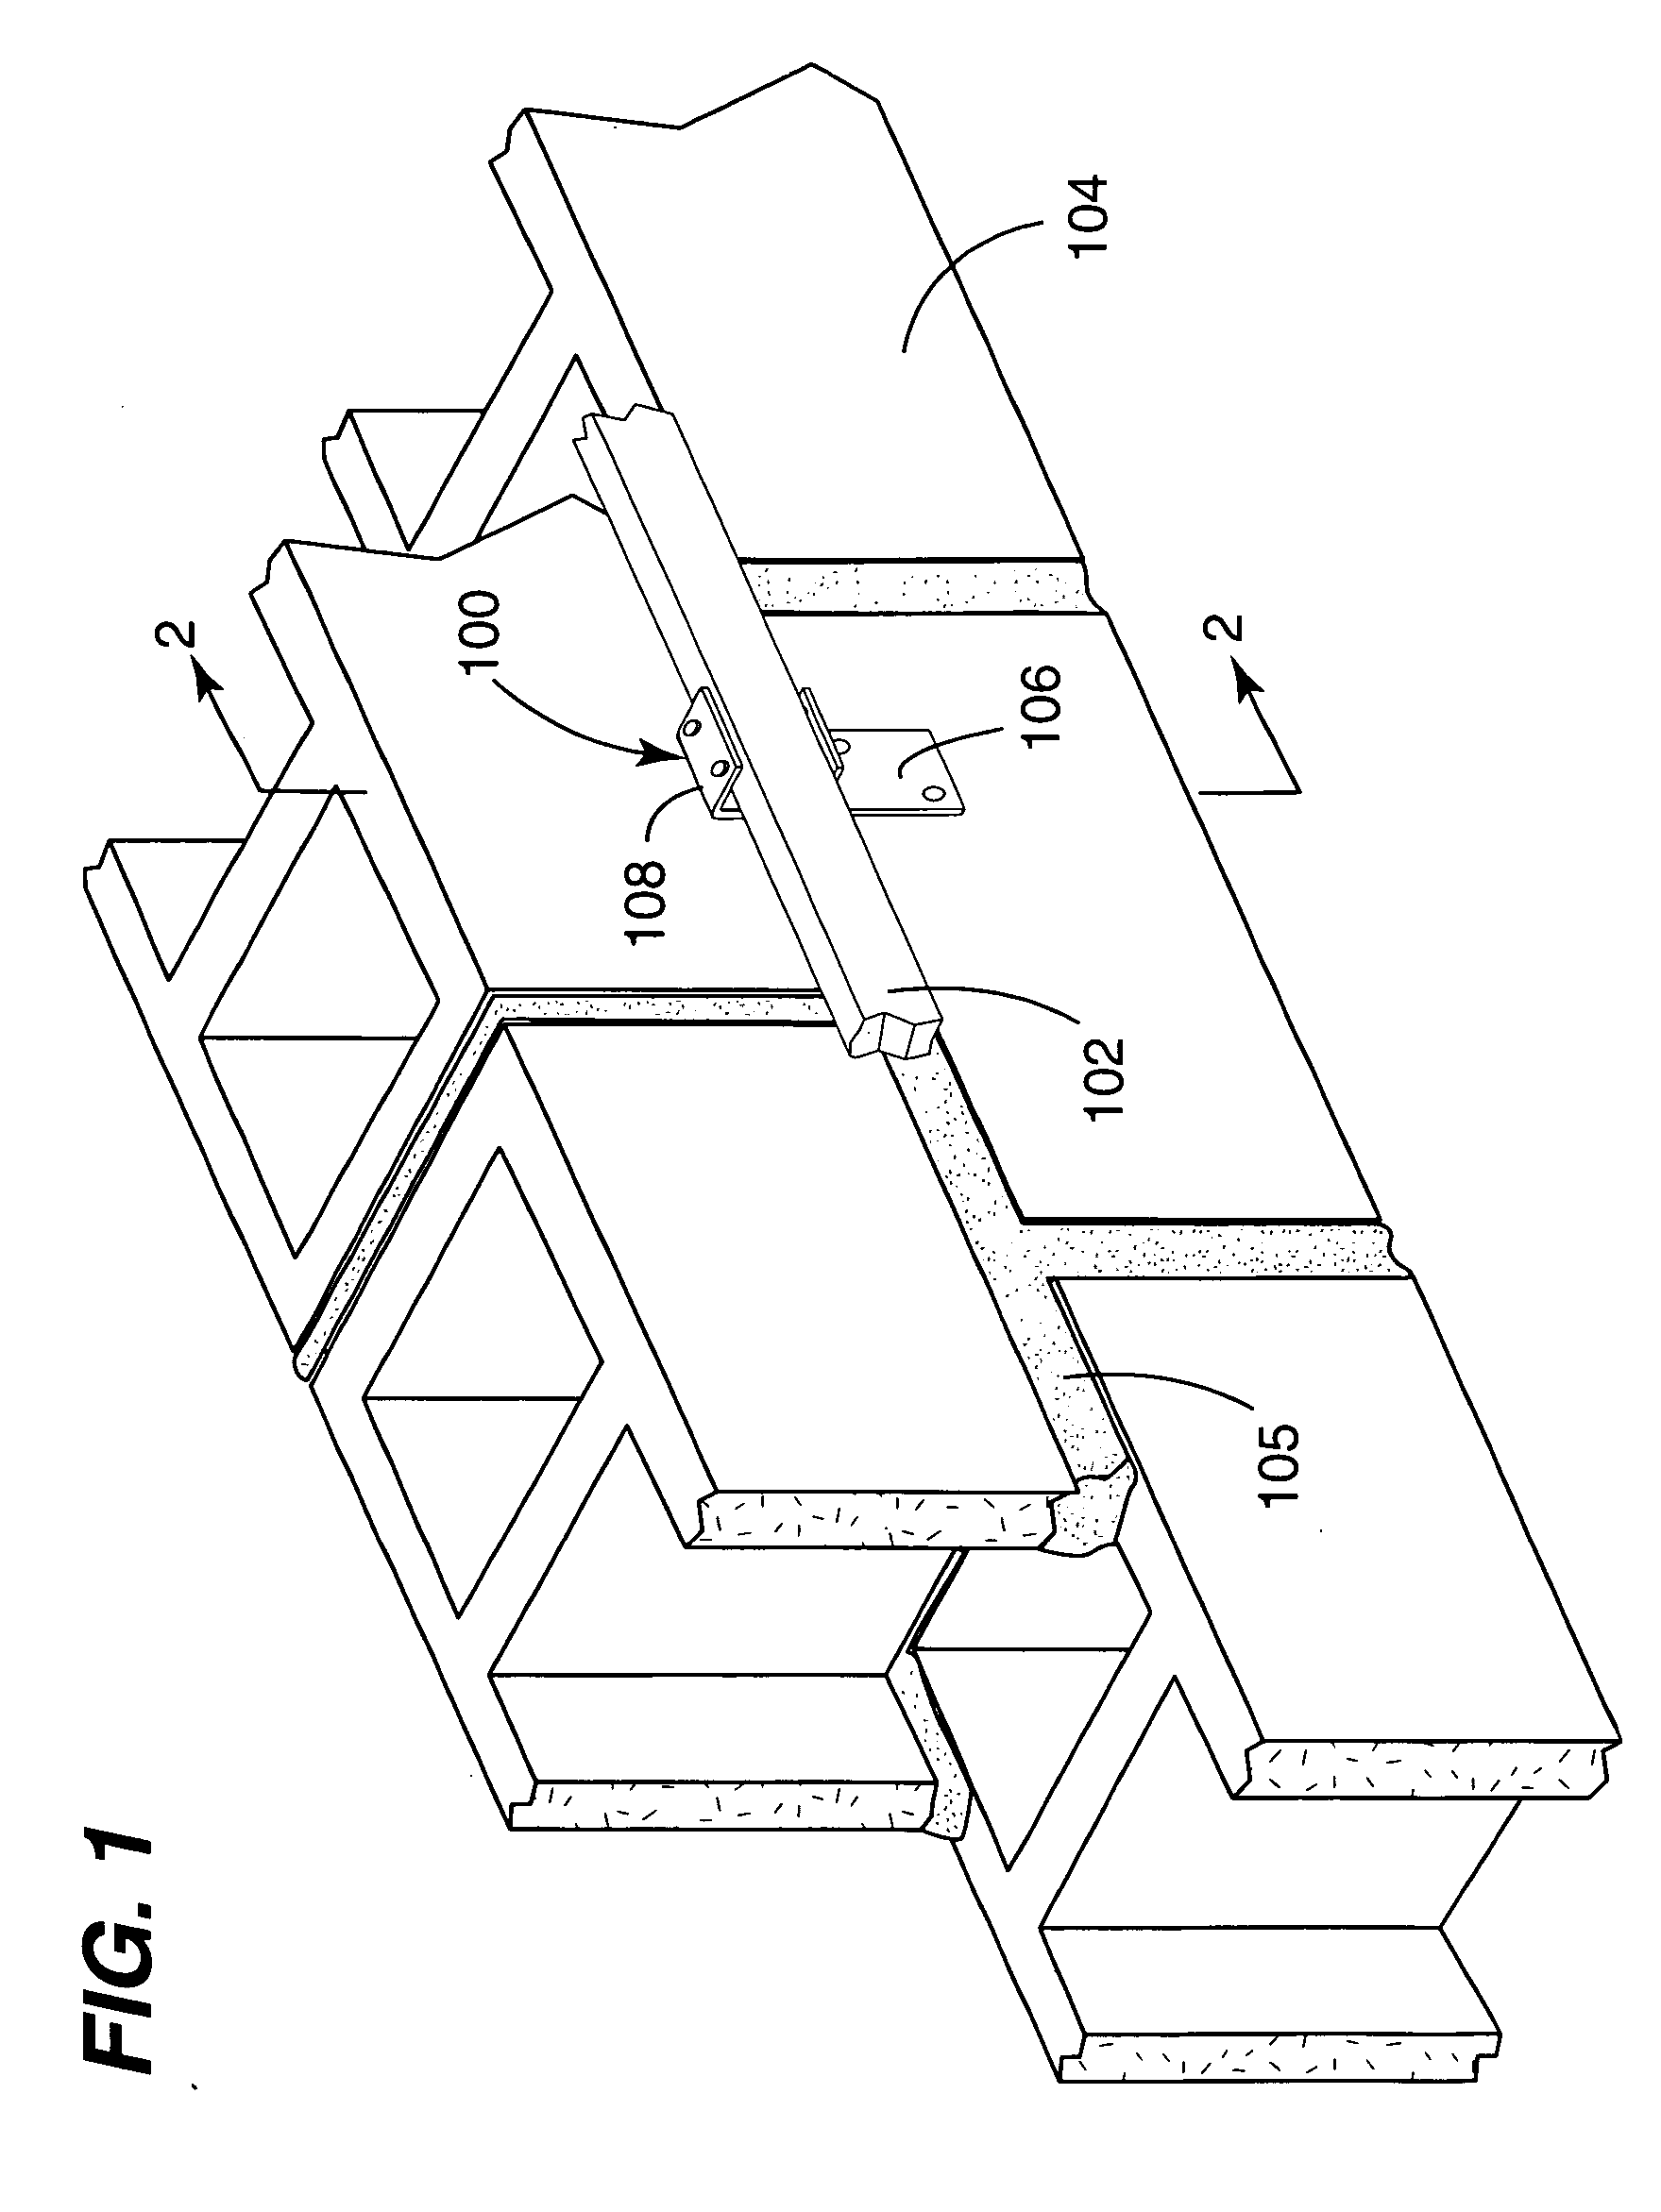 Attachment device for building materials